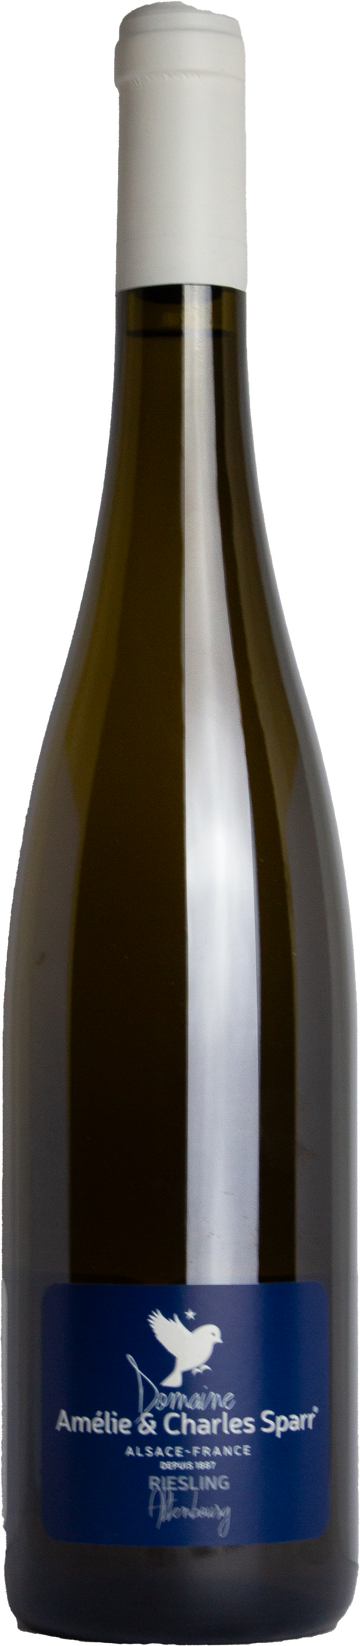 Domaine Charles Sparr - Riesling 